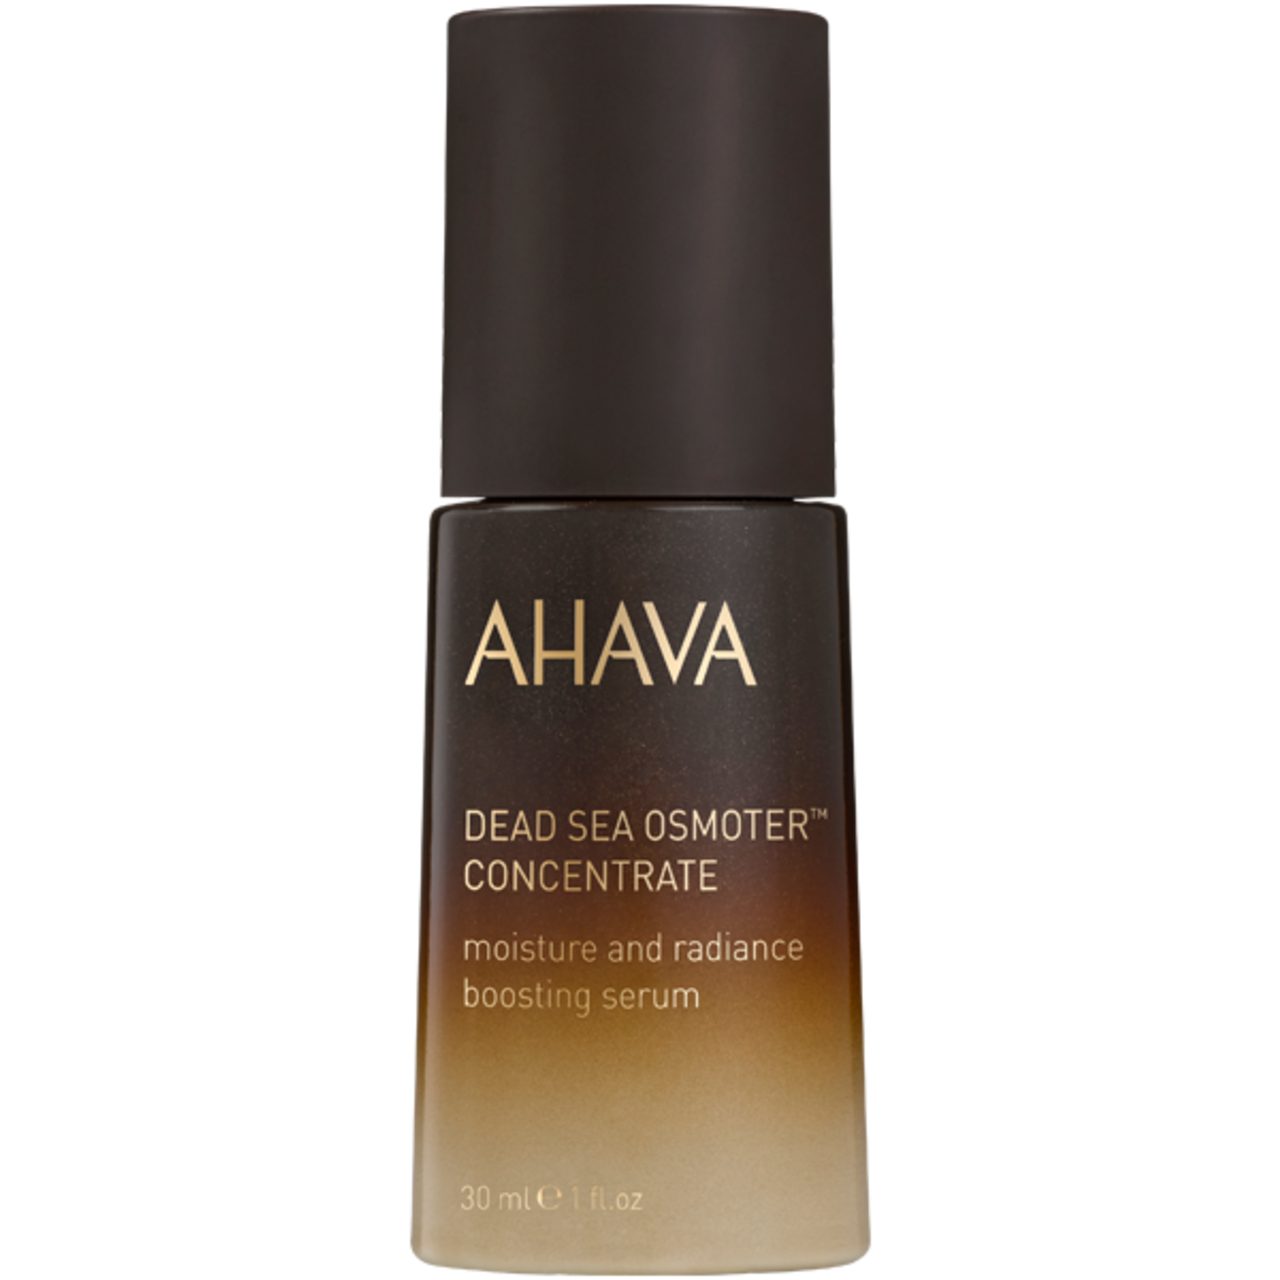 AHAVA Cosmetics GmbH Gesichtspflege Dead Sea Osmoter Concentrate